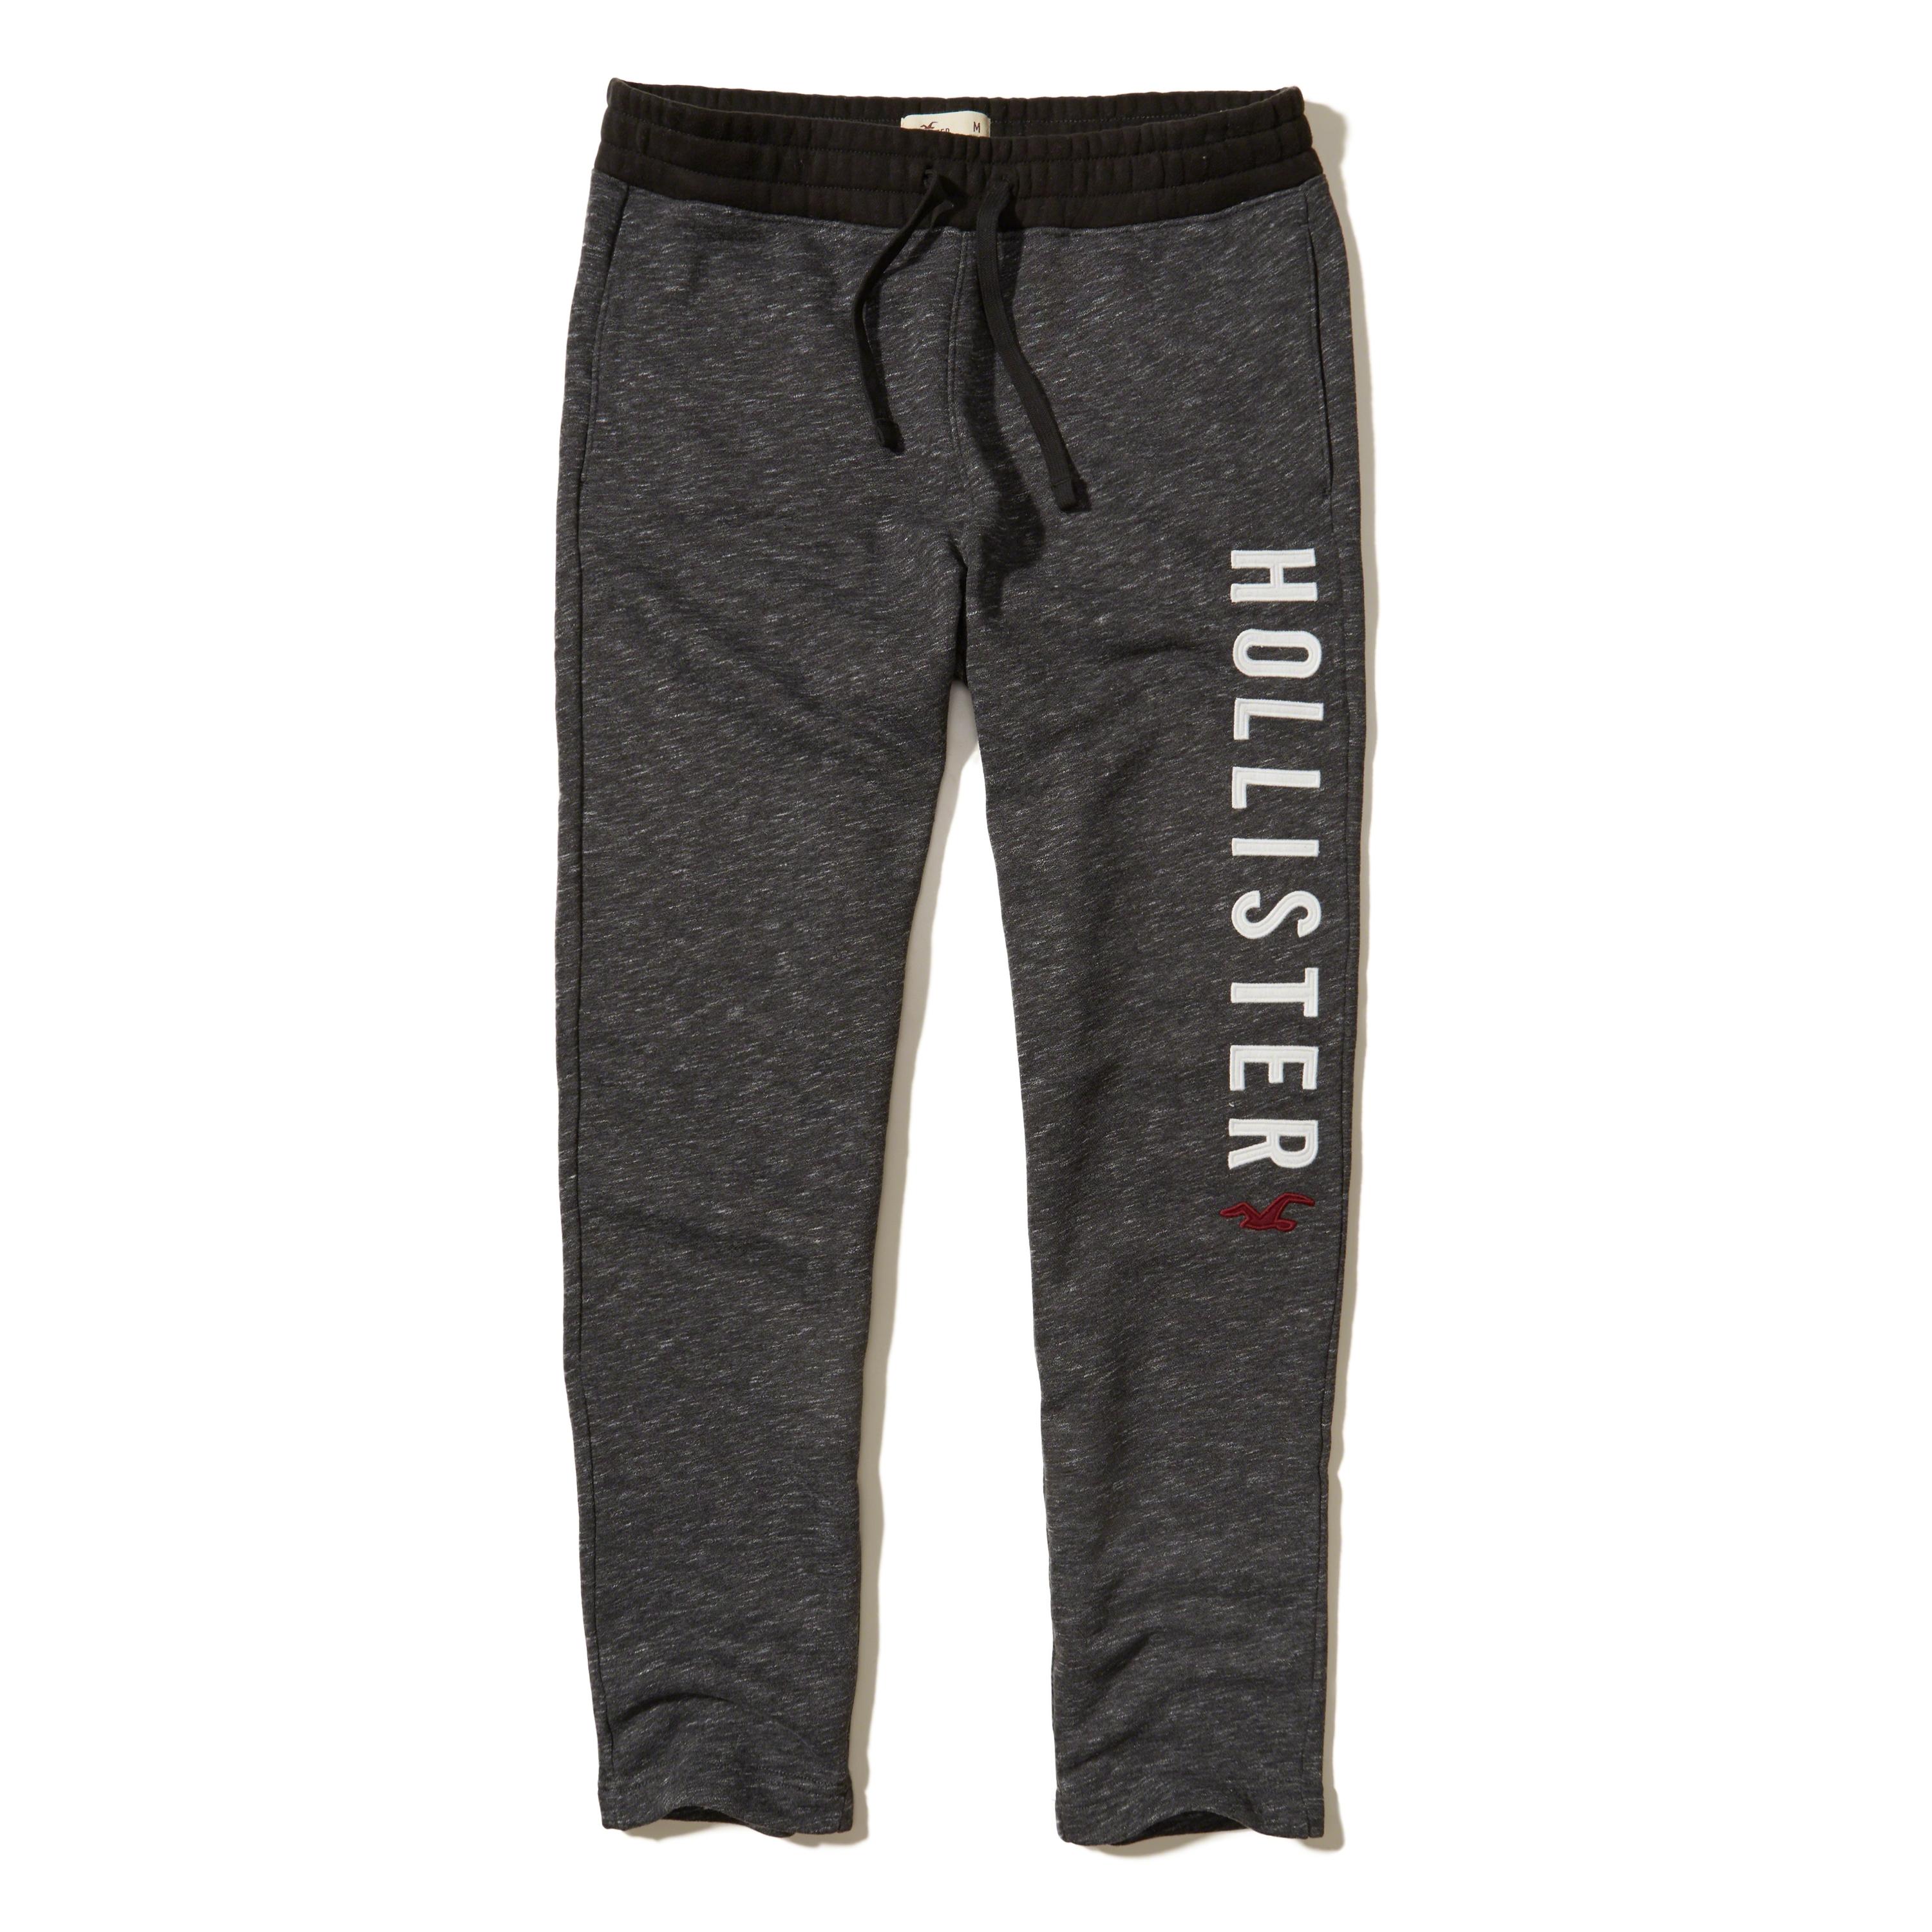 Lyst - Hollister Graphic Straight-leg Sweatpants in Gray for Men